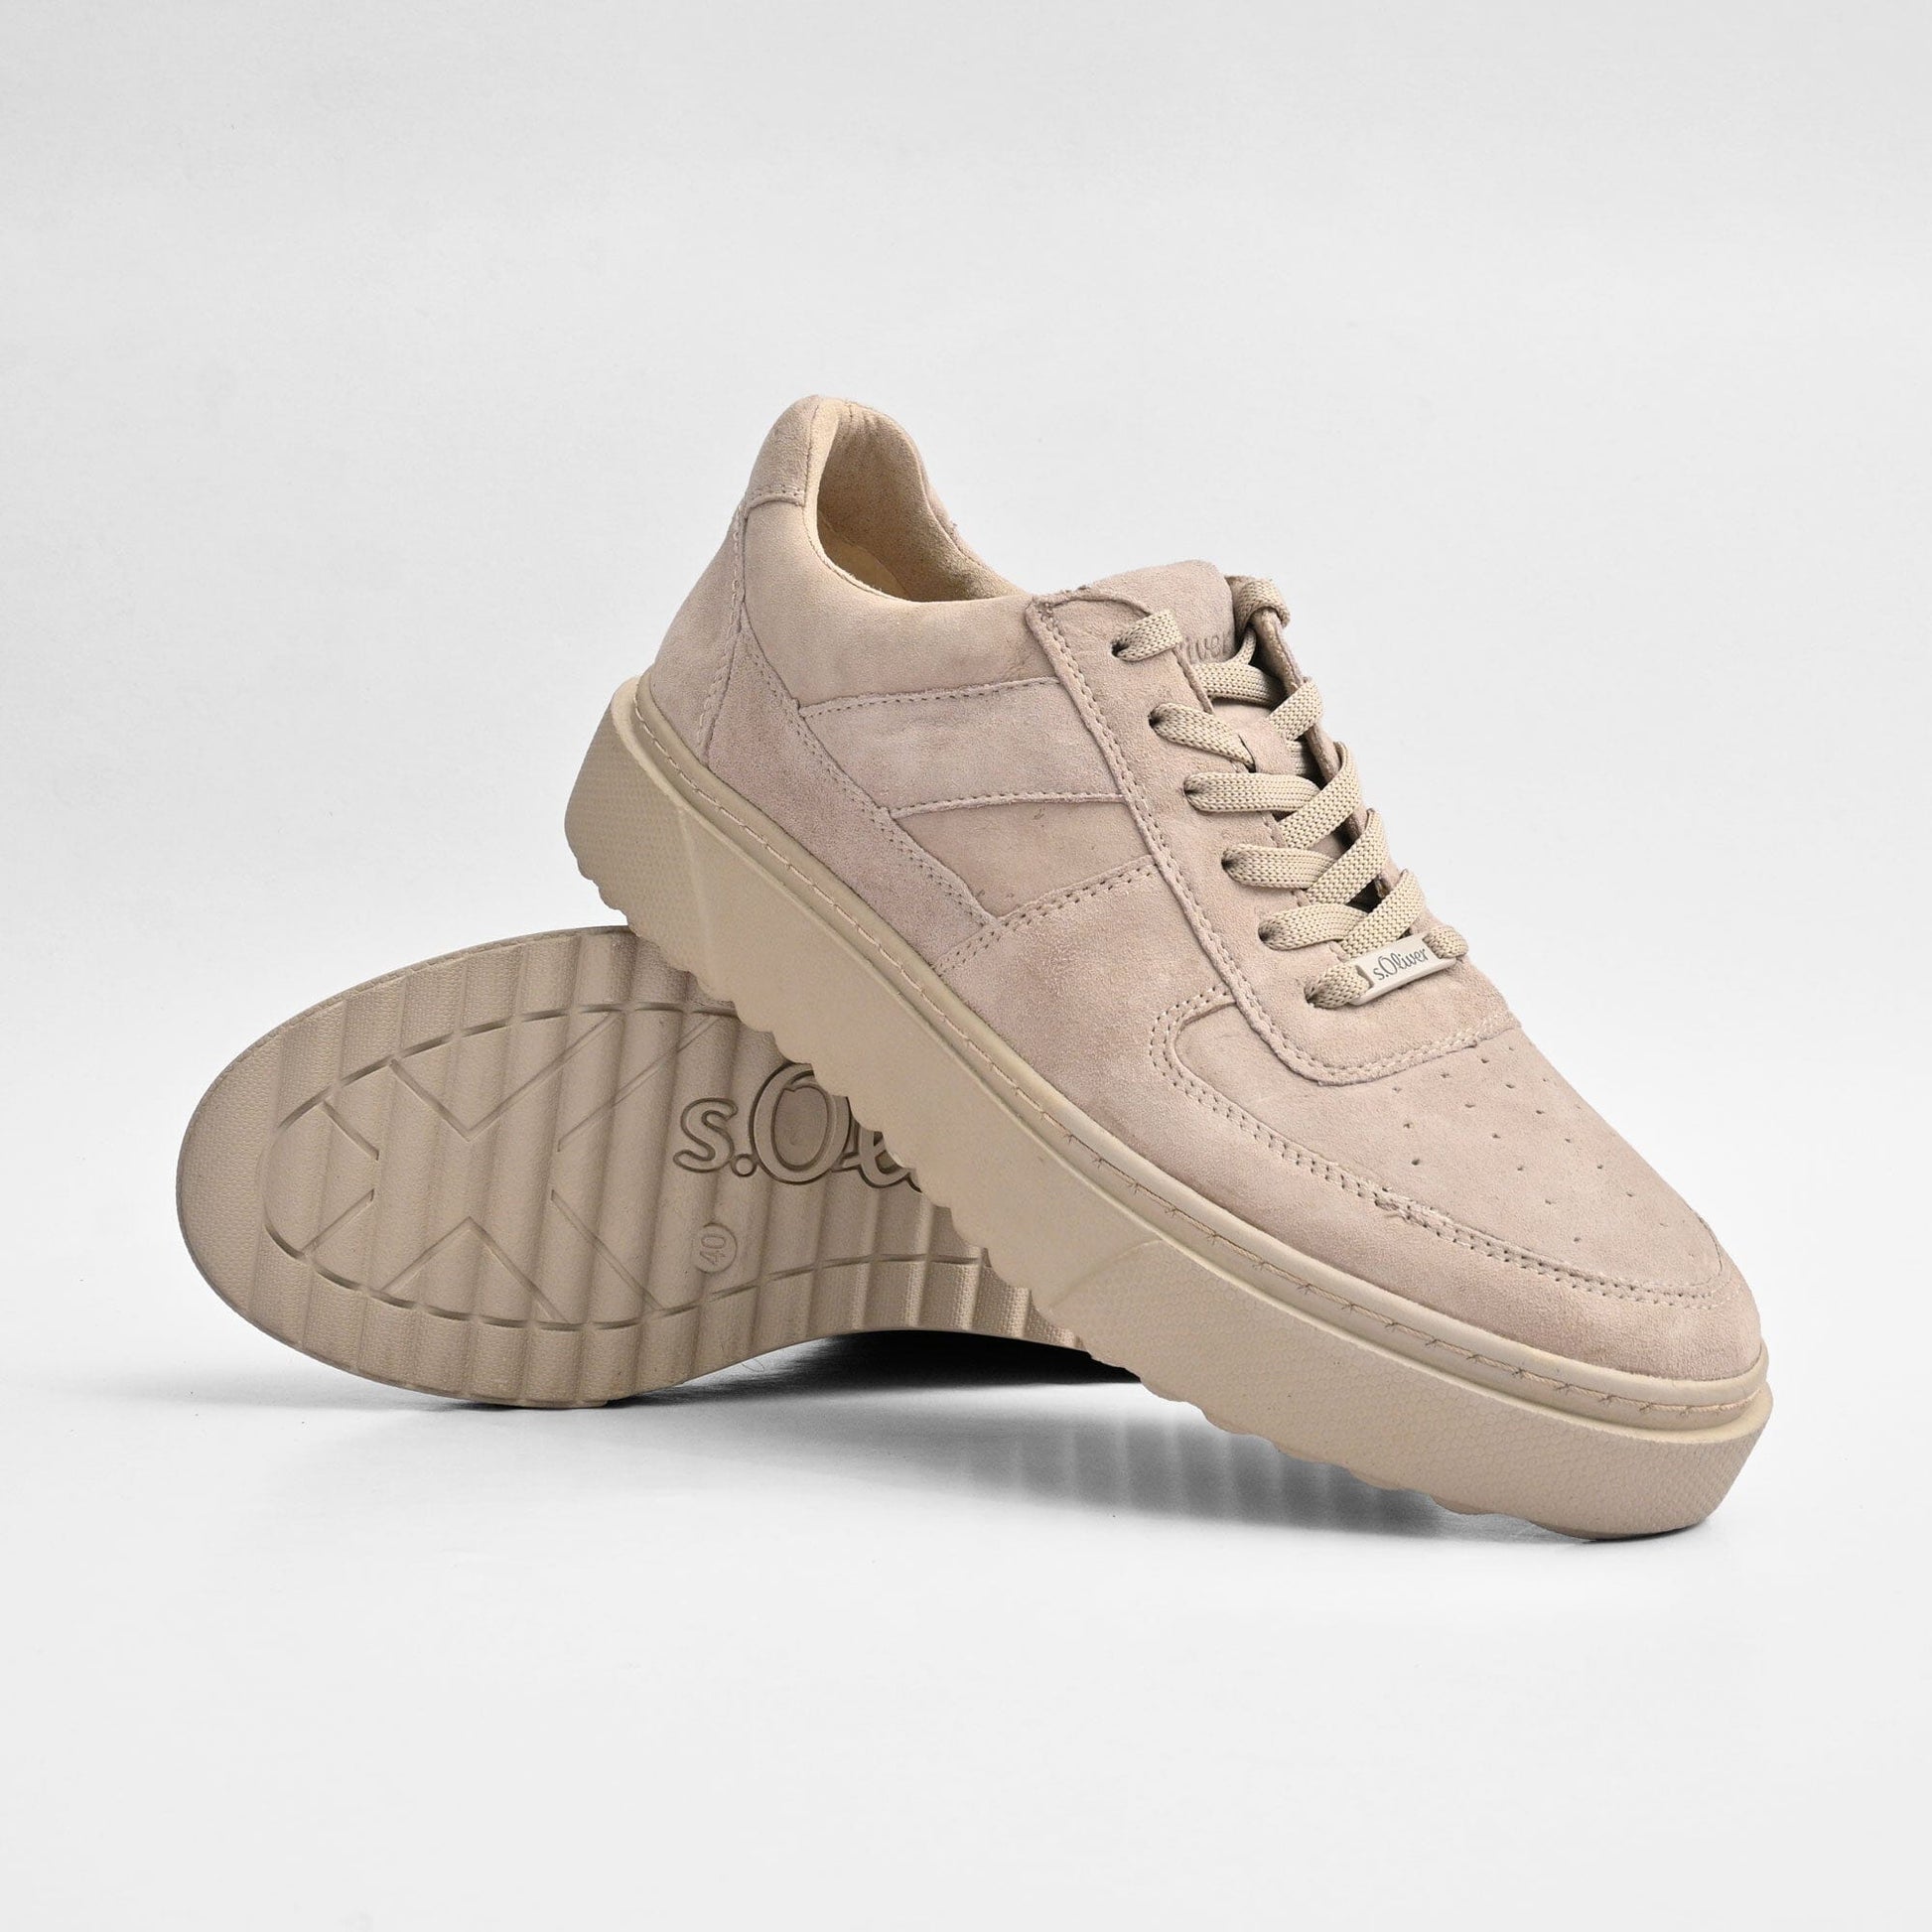 S.Oliver Unisex Soft Sole Genuine Upper Leather Sneakers Unisex Shoes Shafi Pvt. Limited Taupe EUR 36 